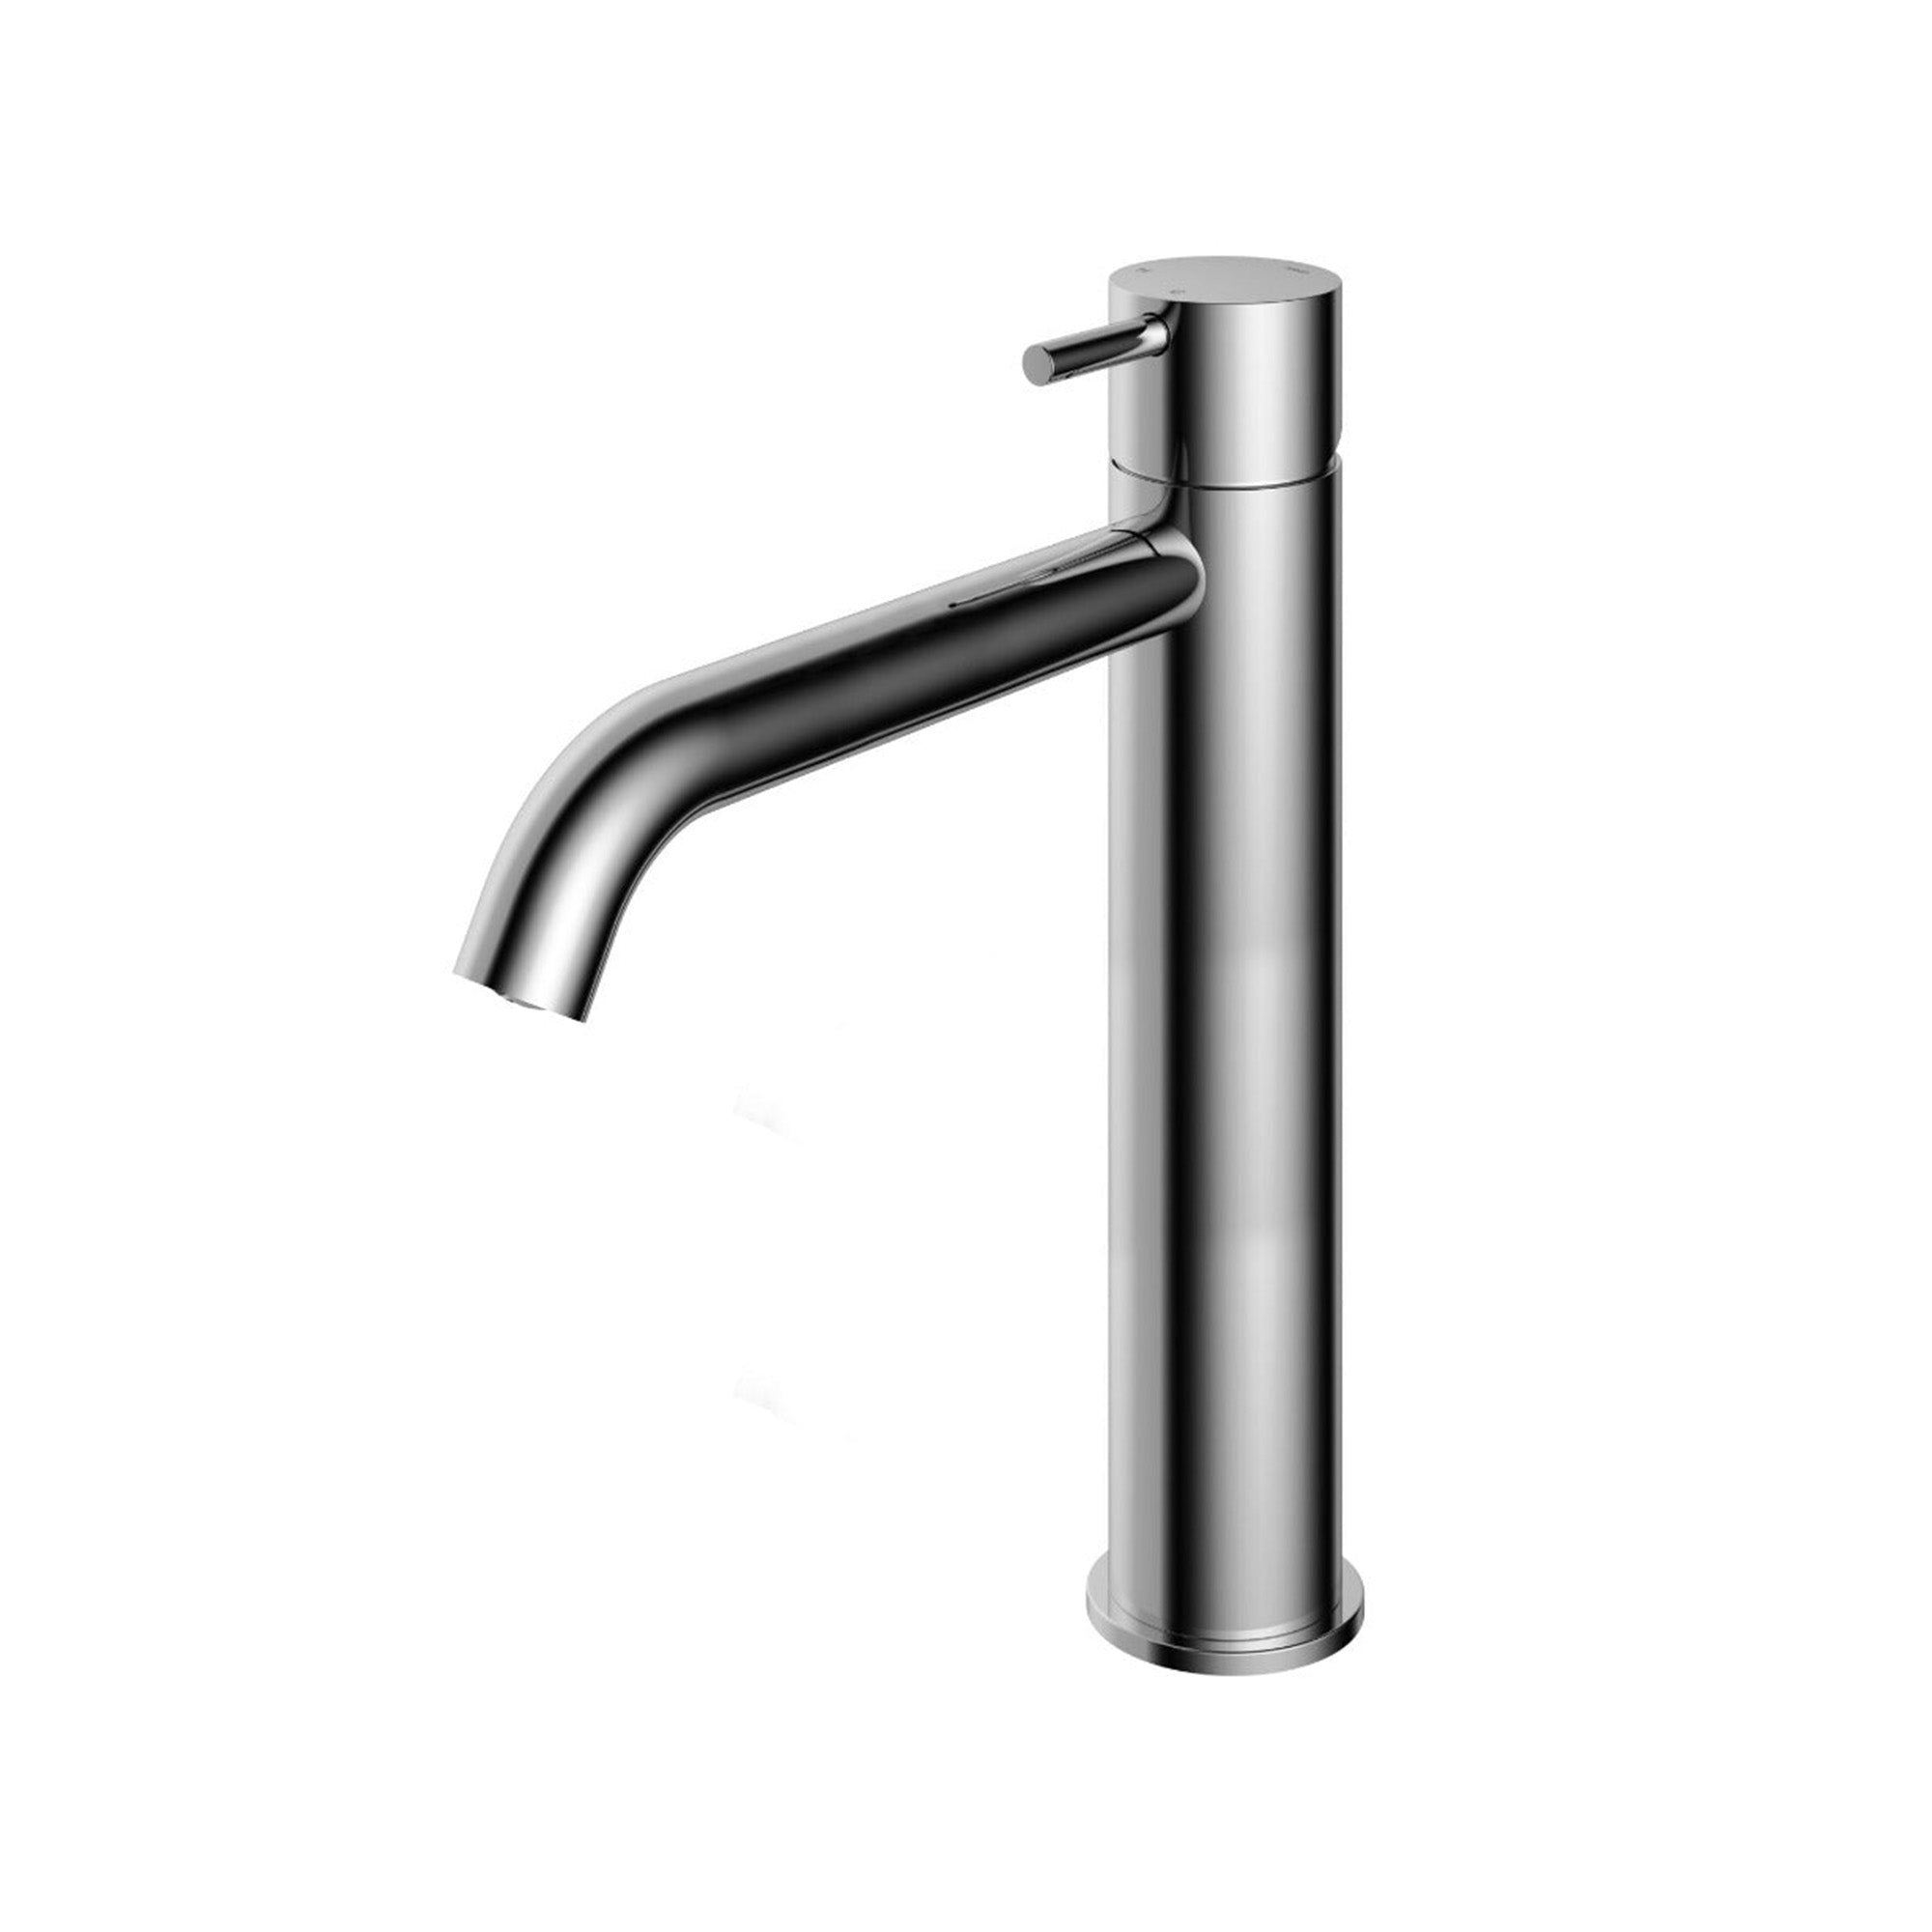 Cobber 286 Tall Basin Mixer Tap Curved Spout Monobloc